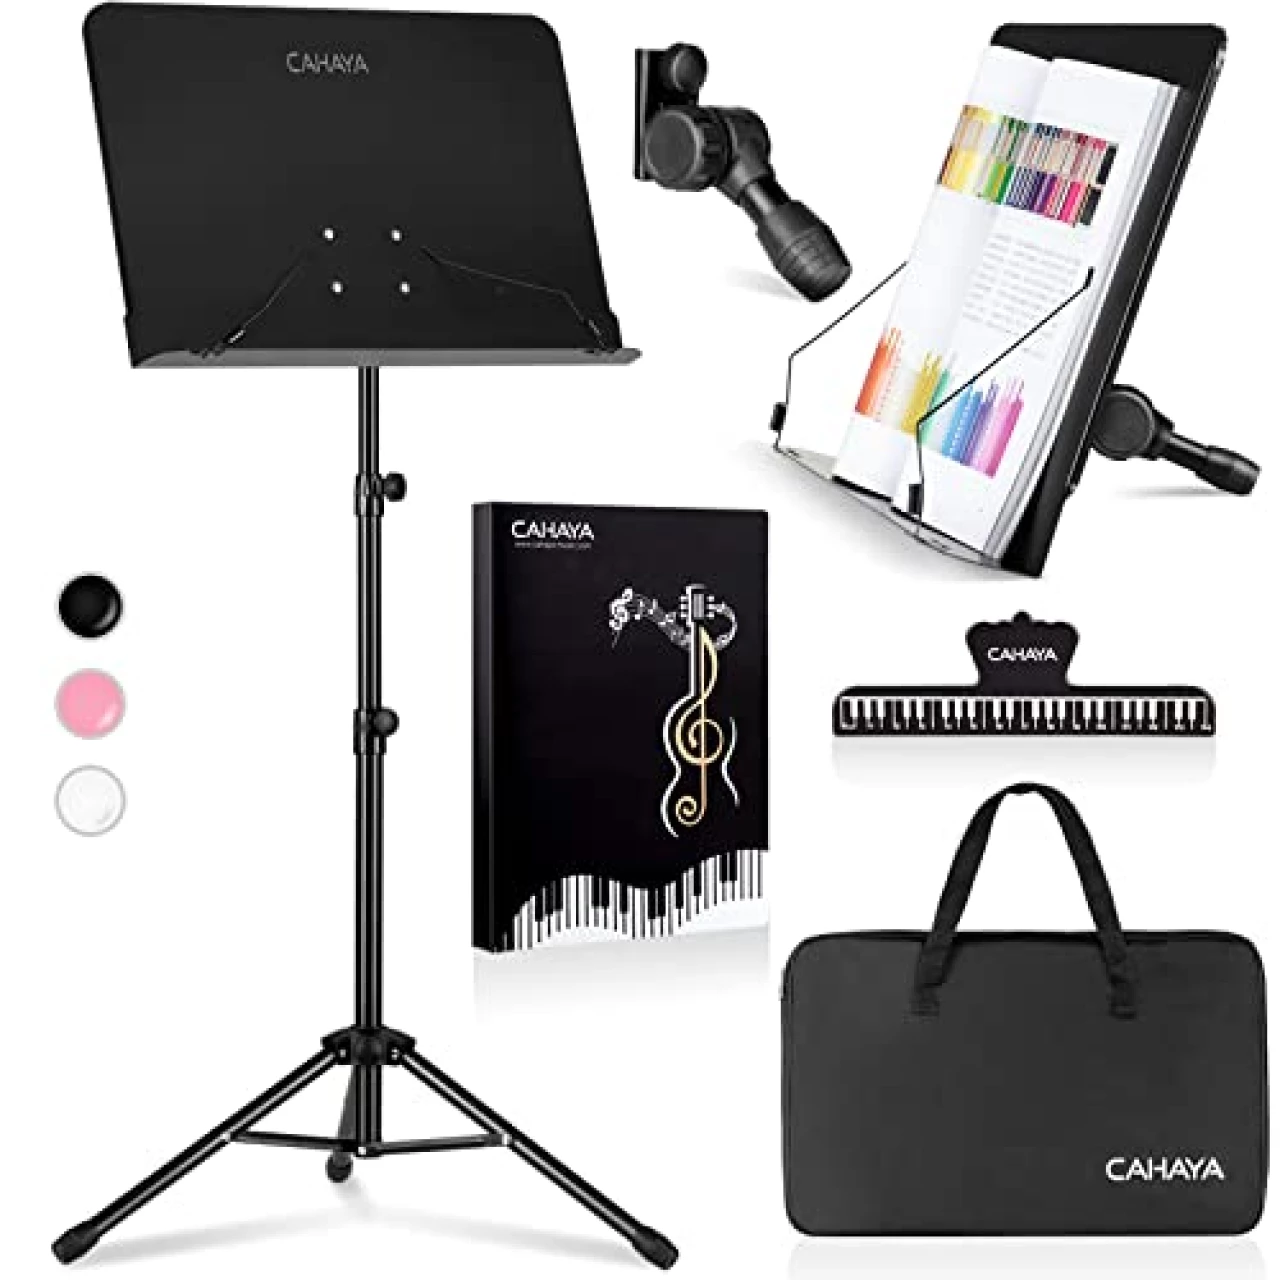 CAHAYA 5 in 1 Dual-use Sheet Music Stand &amp; Desktop Book Stand Metal Portable Solid Back Height Adjustable from 31.4-57in with Book Stand Support, Carrying Bag, Sheet Music Folder and Clip